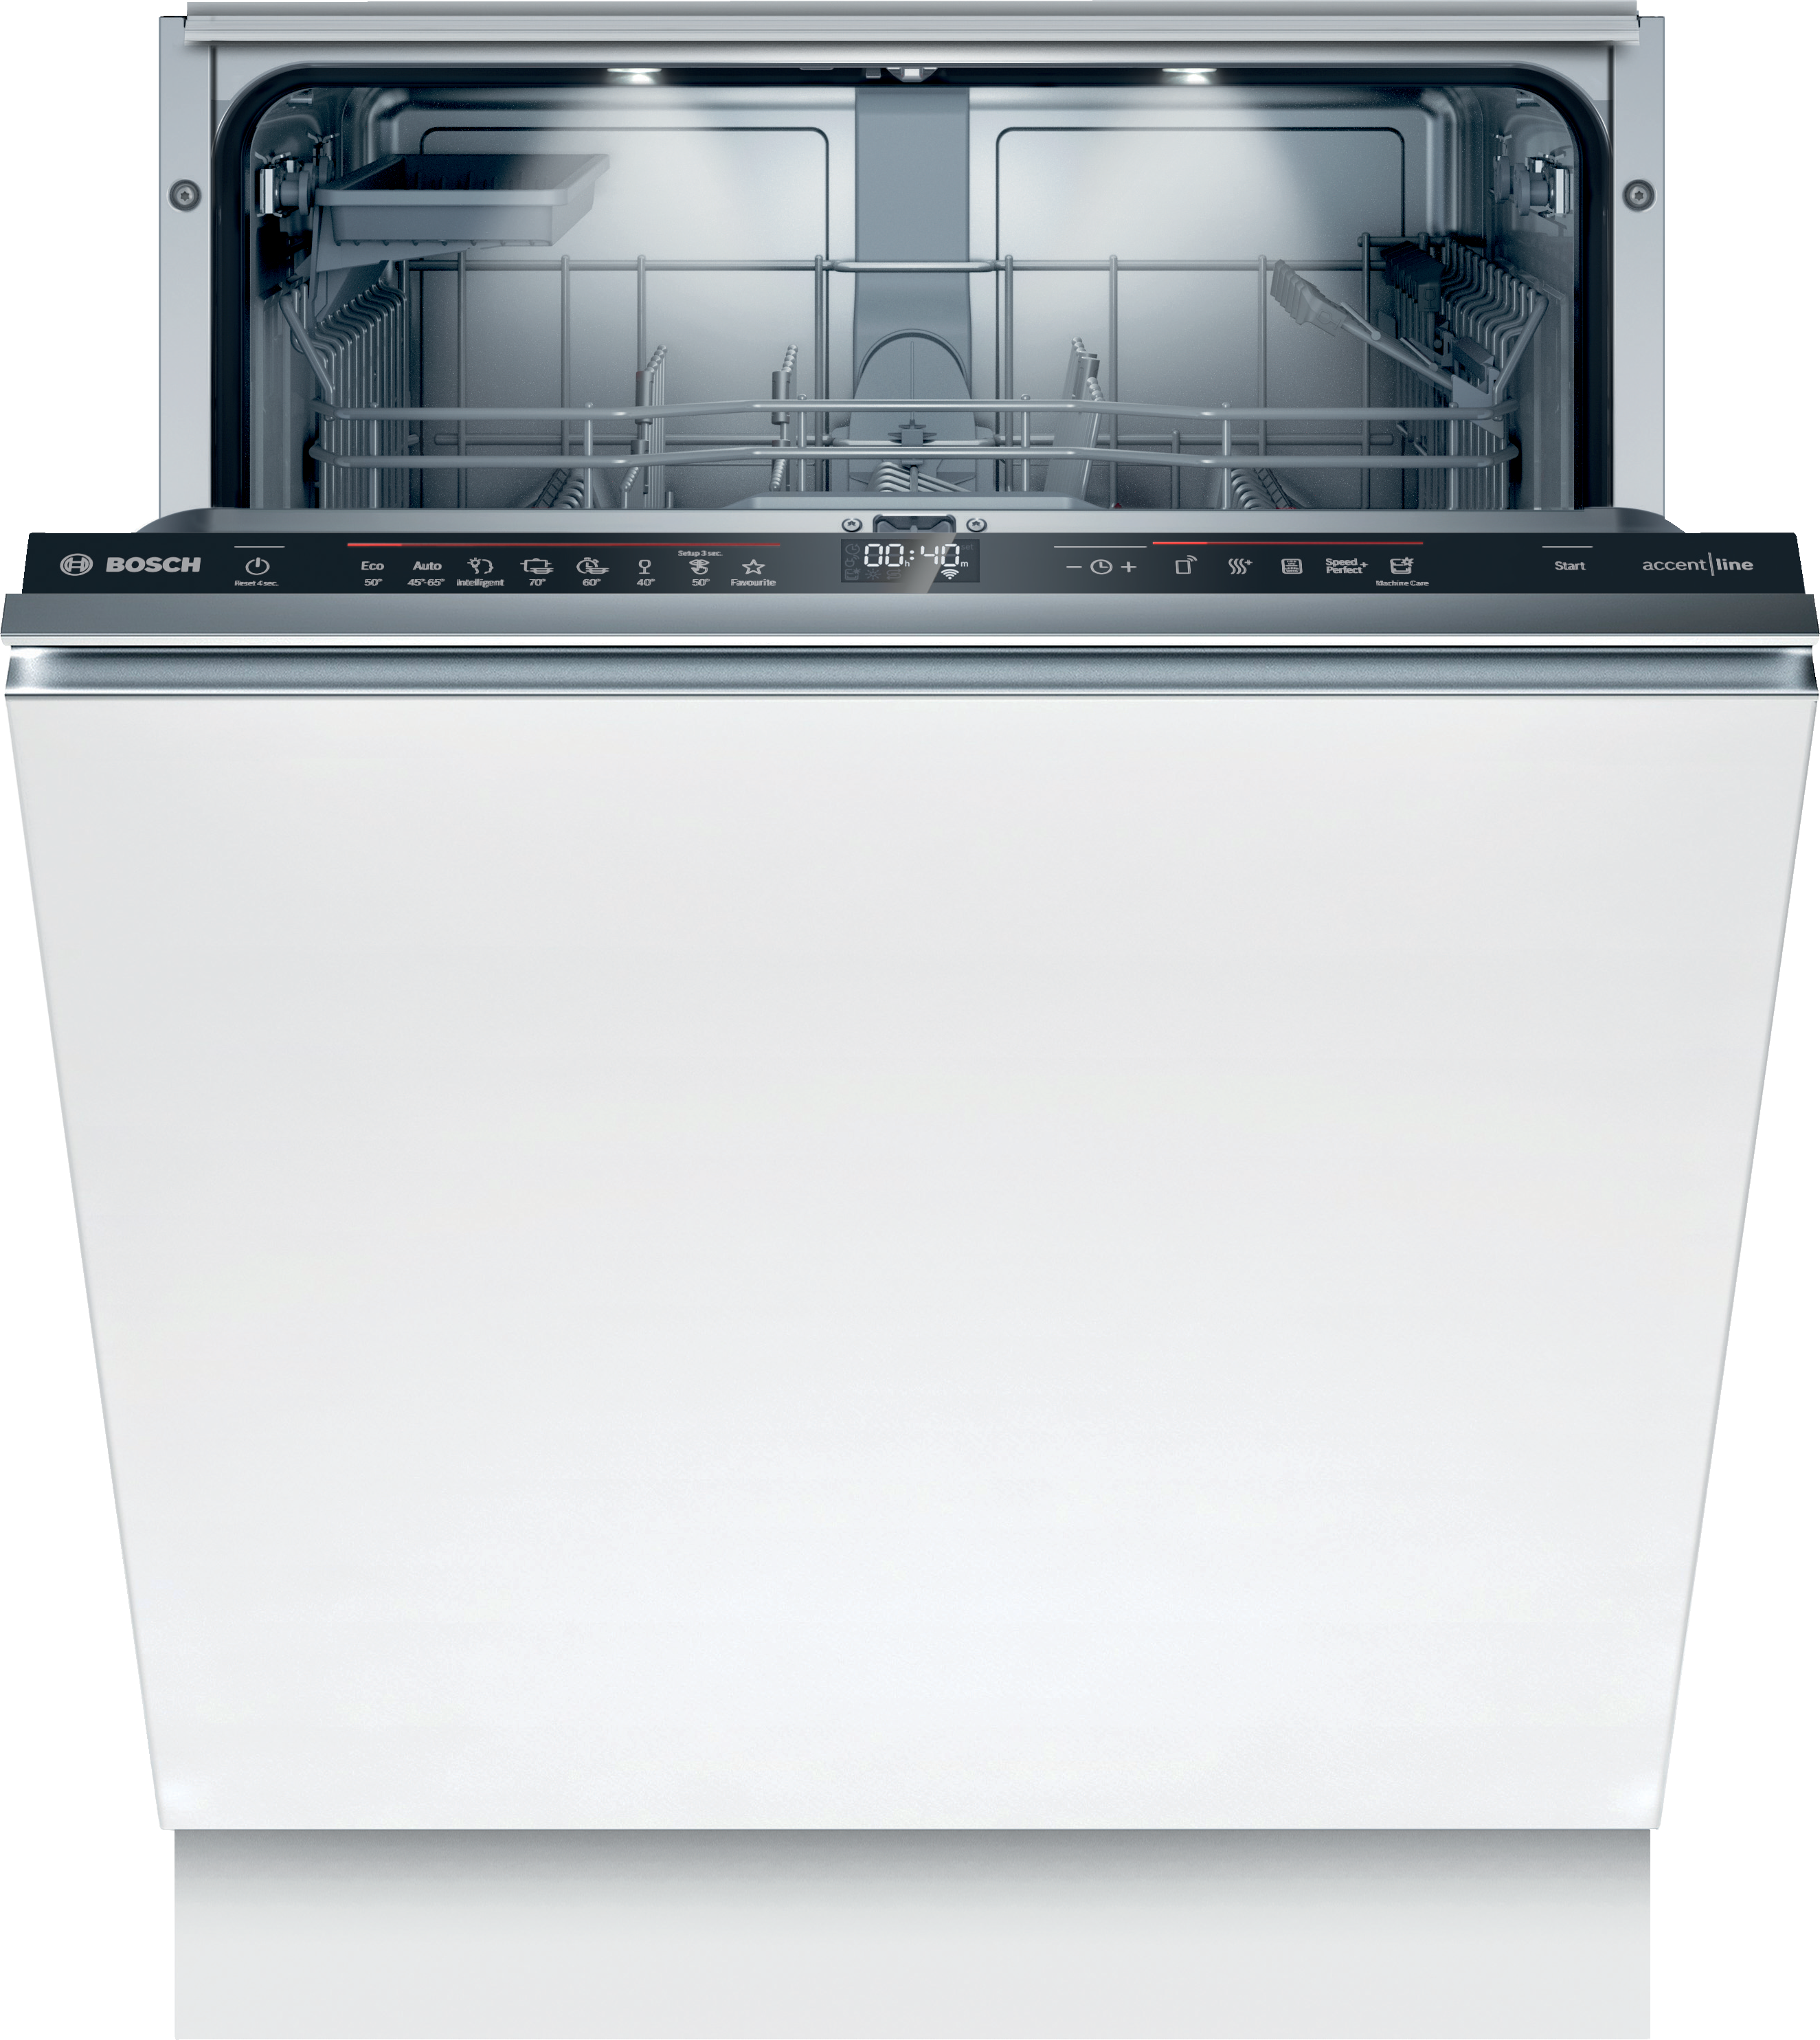 Series 6, fully-integrated dishwasher, 60 cm, SMD6ZB801E